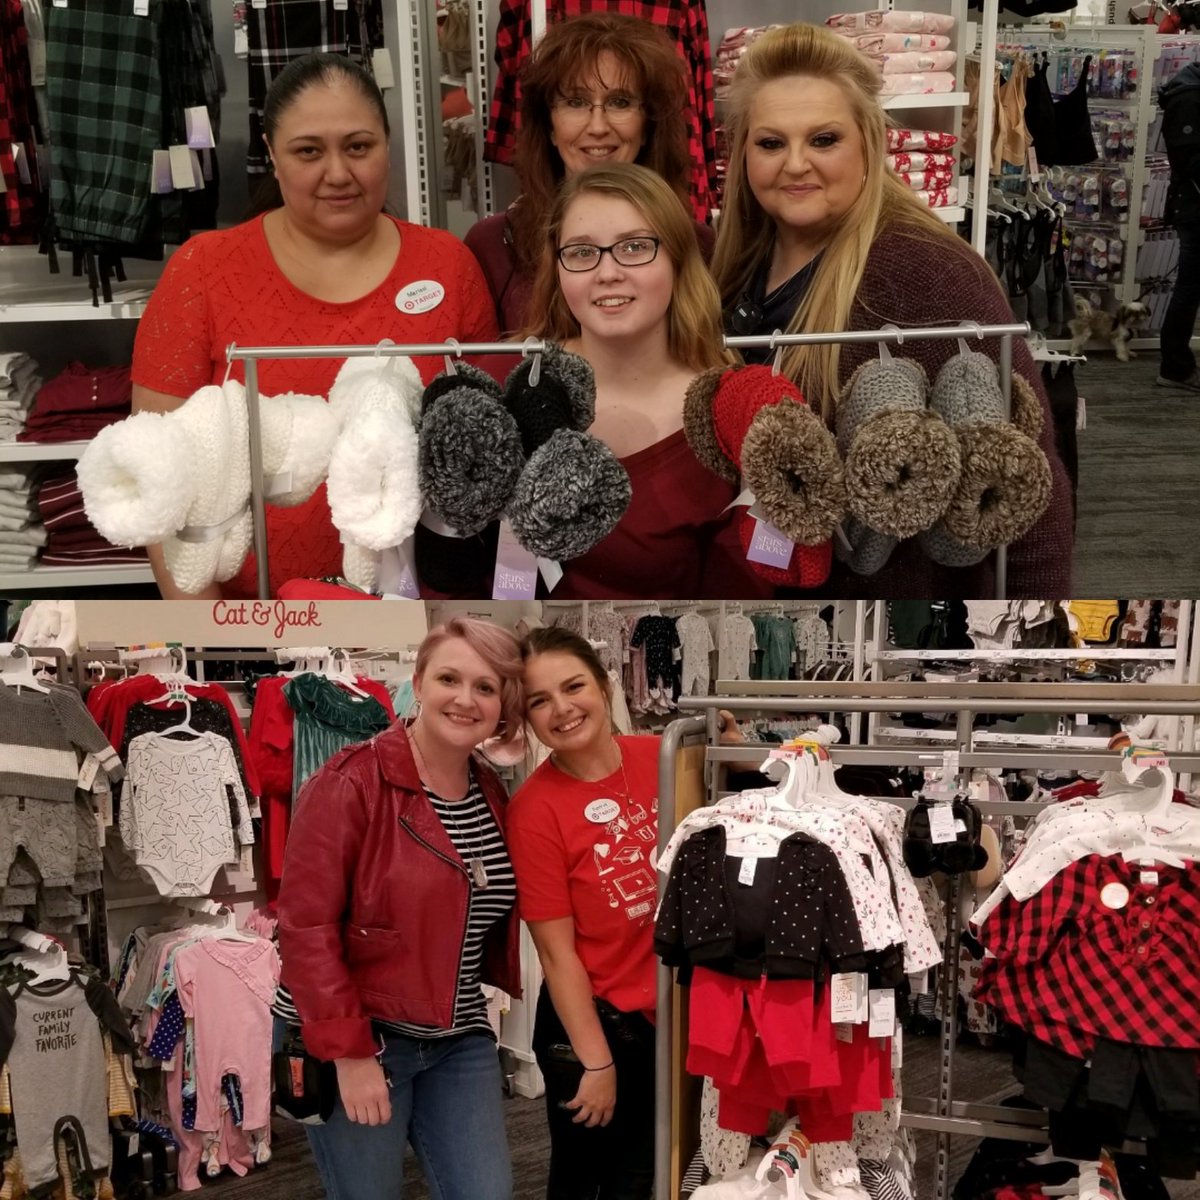 Double Digit comps in RTW and NIT!! Brand is Queen here at 663! #worksomewhereyoulove❤ 
@WendyfromTarget @emily_lindaaaa @CourtneyAFrye @DownsAlli @DreaMundell